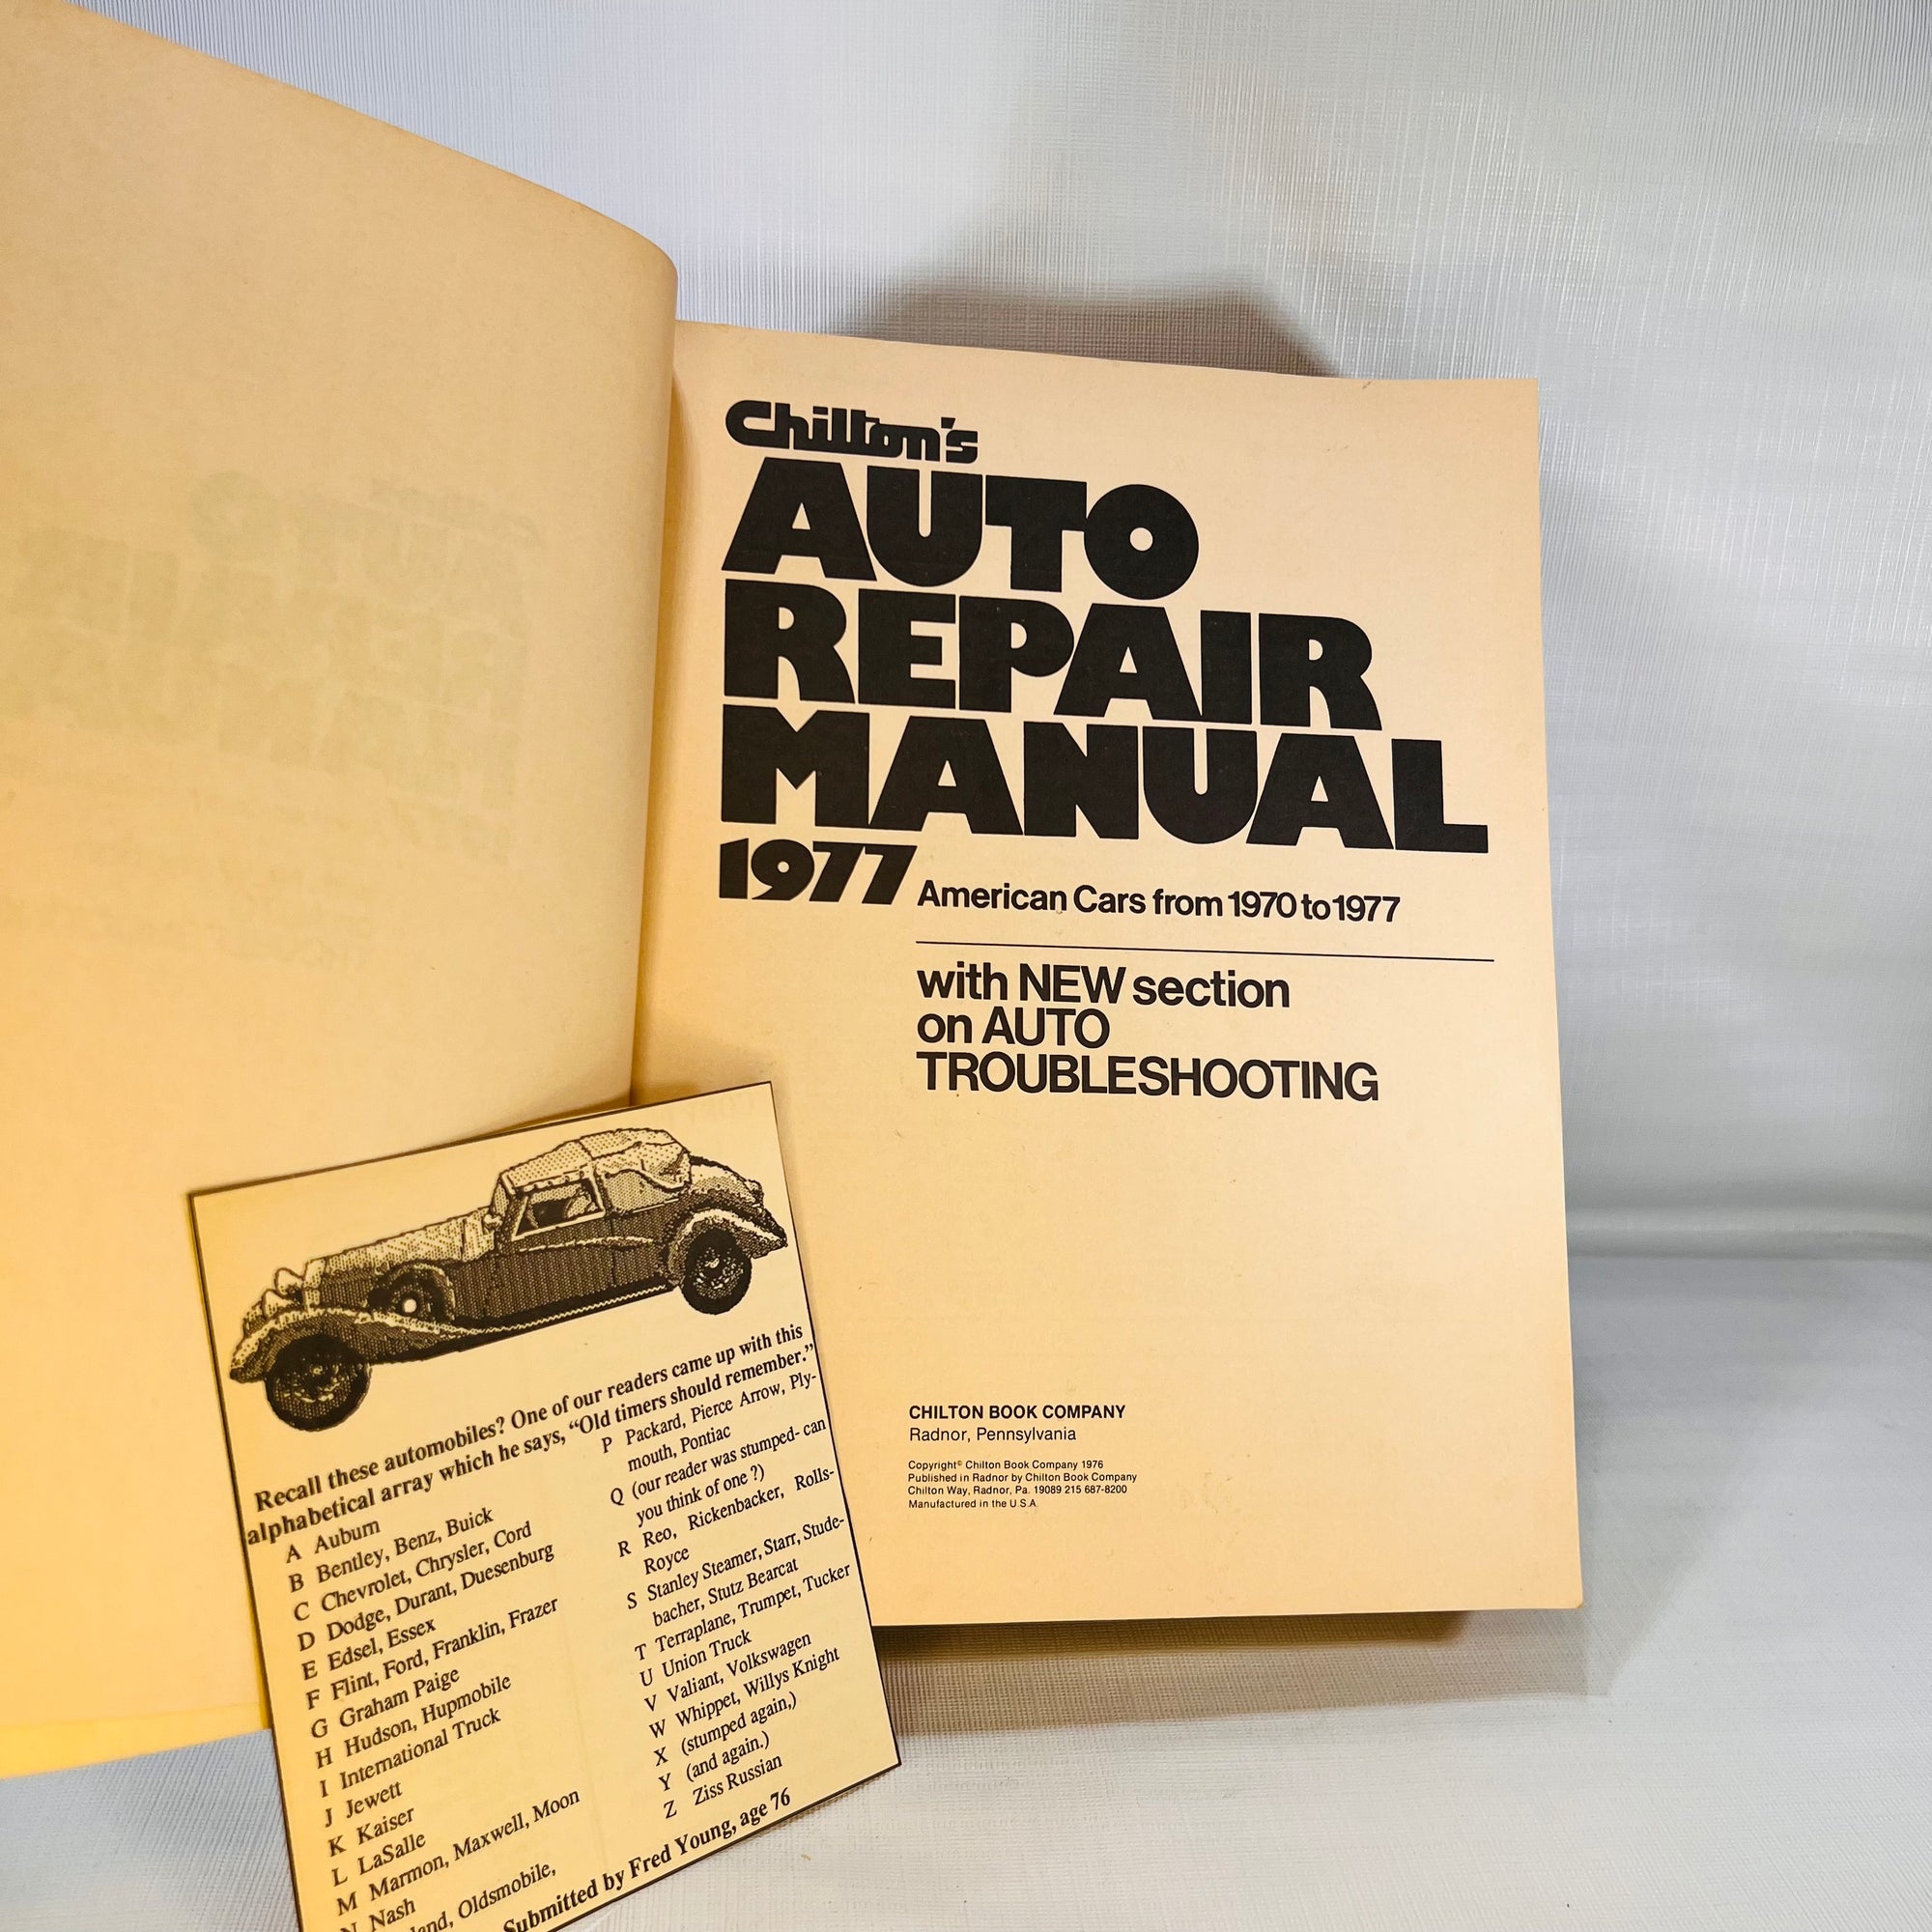 Chilton's Auto Repair Manual 1977 American Cars from 1970-77 with section on Auto Trouble Shooting Chilton Book Company